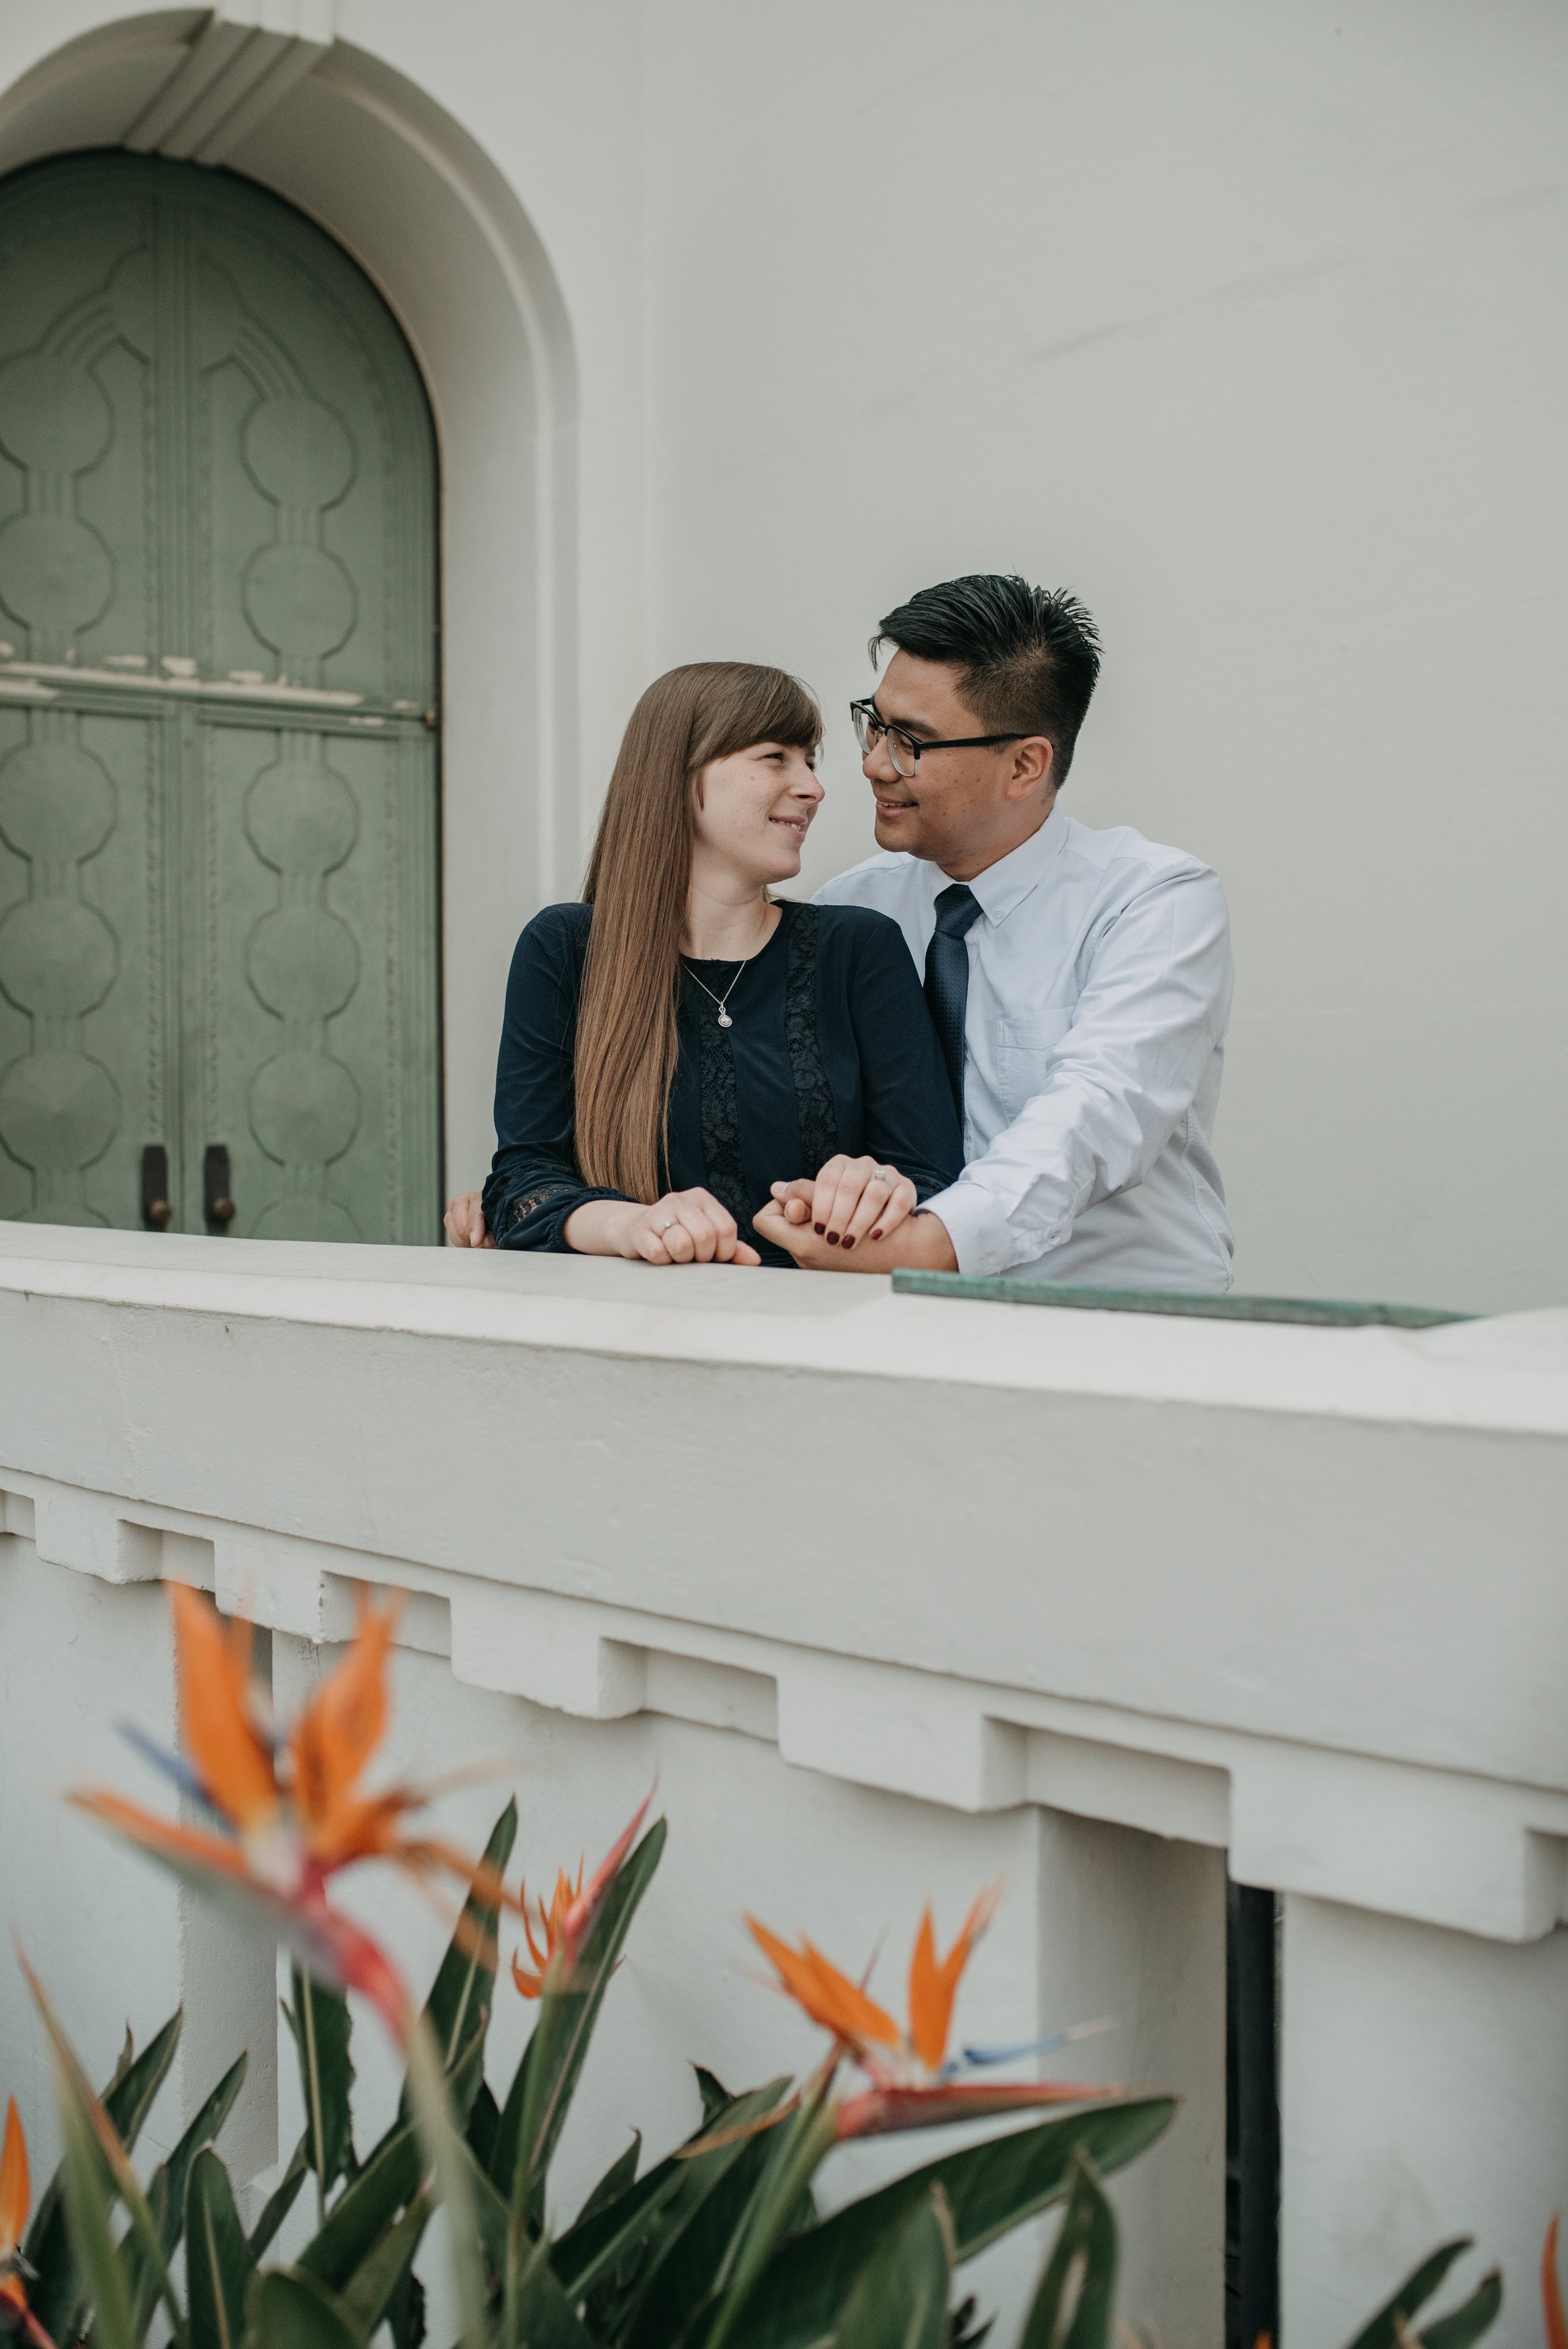 losangeles-engagement-session-griffith-observatory-southerncalifornia-wedding-photographer-32.jpg